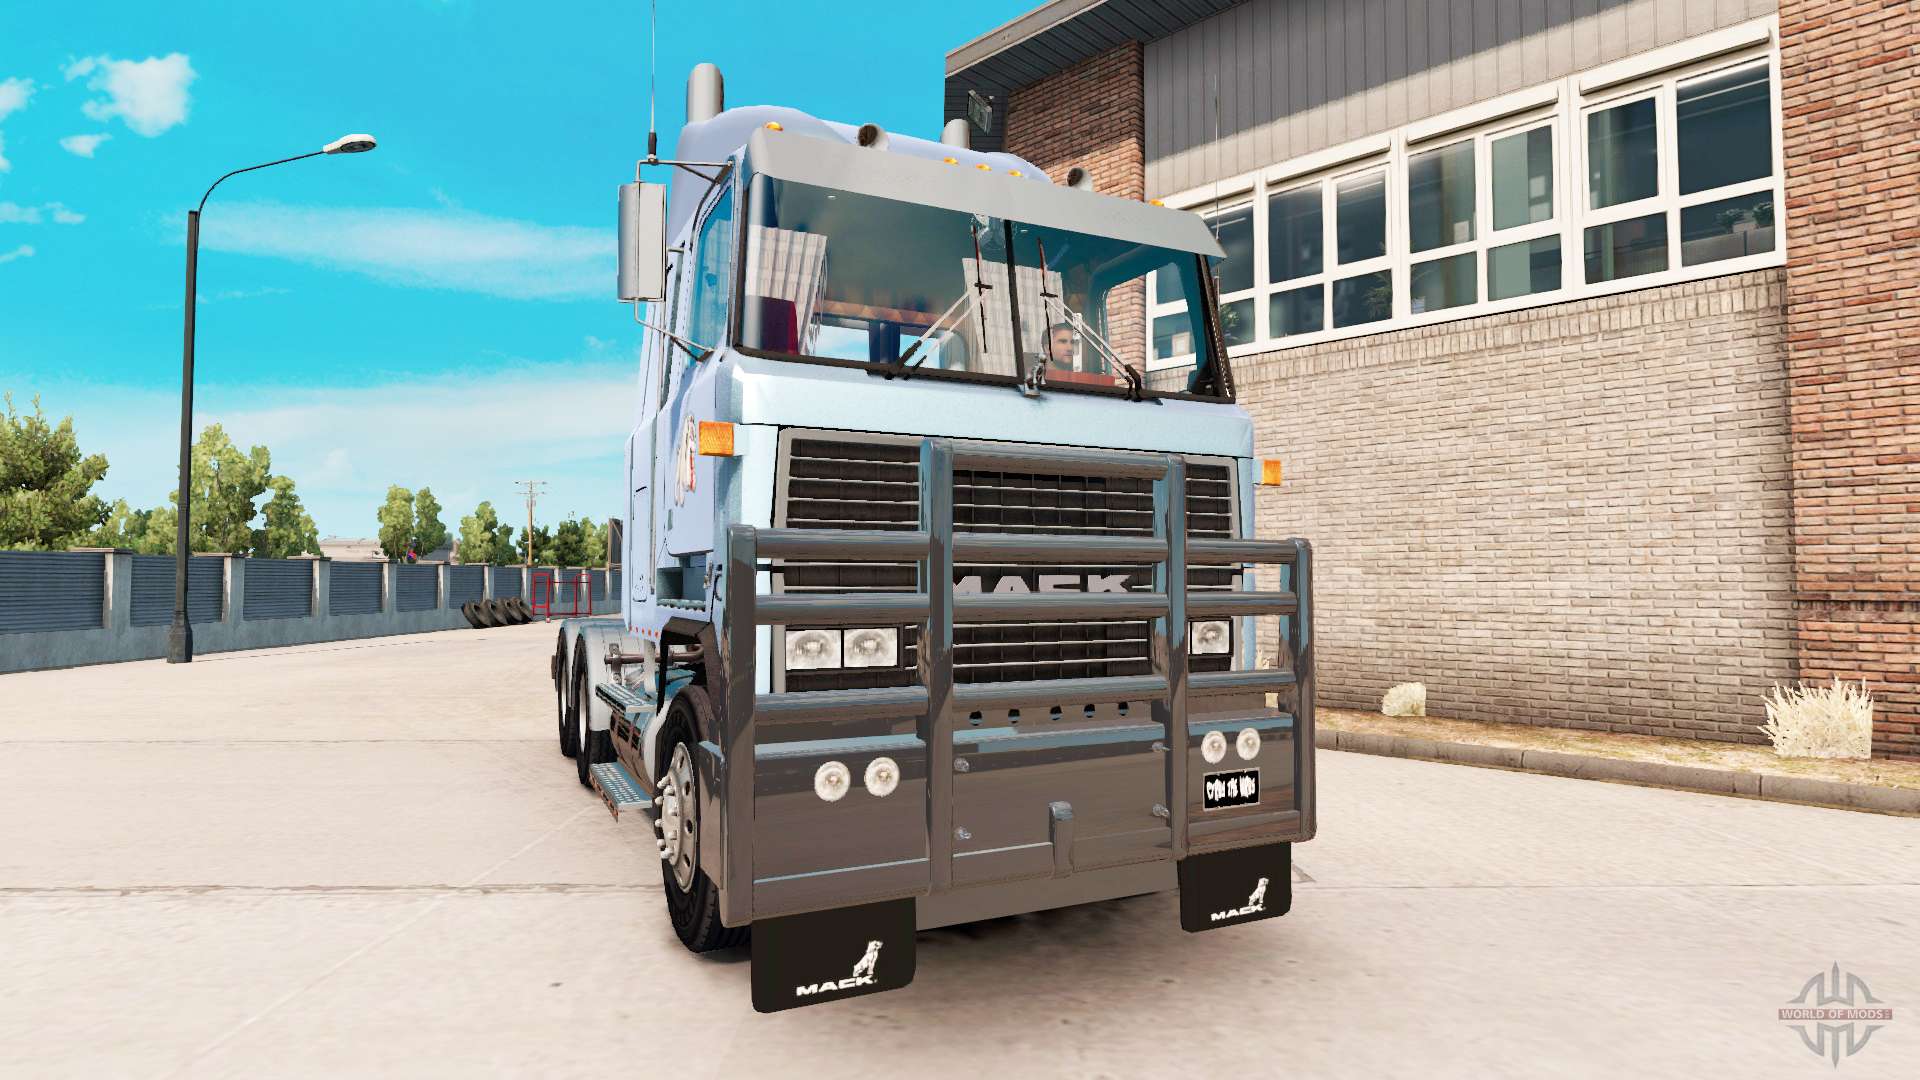 vehicle simulator download the liners